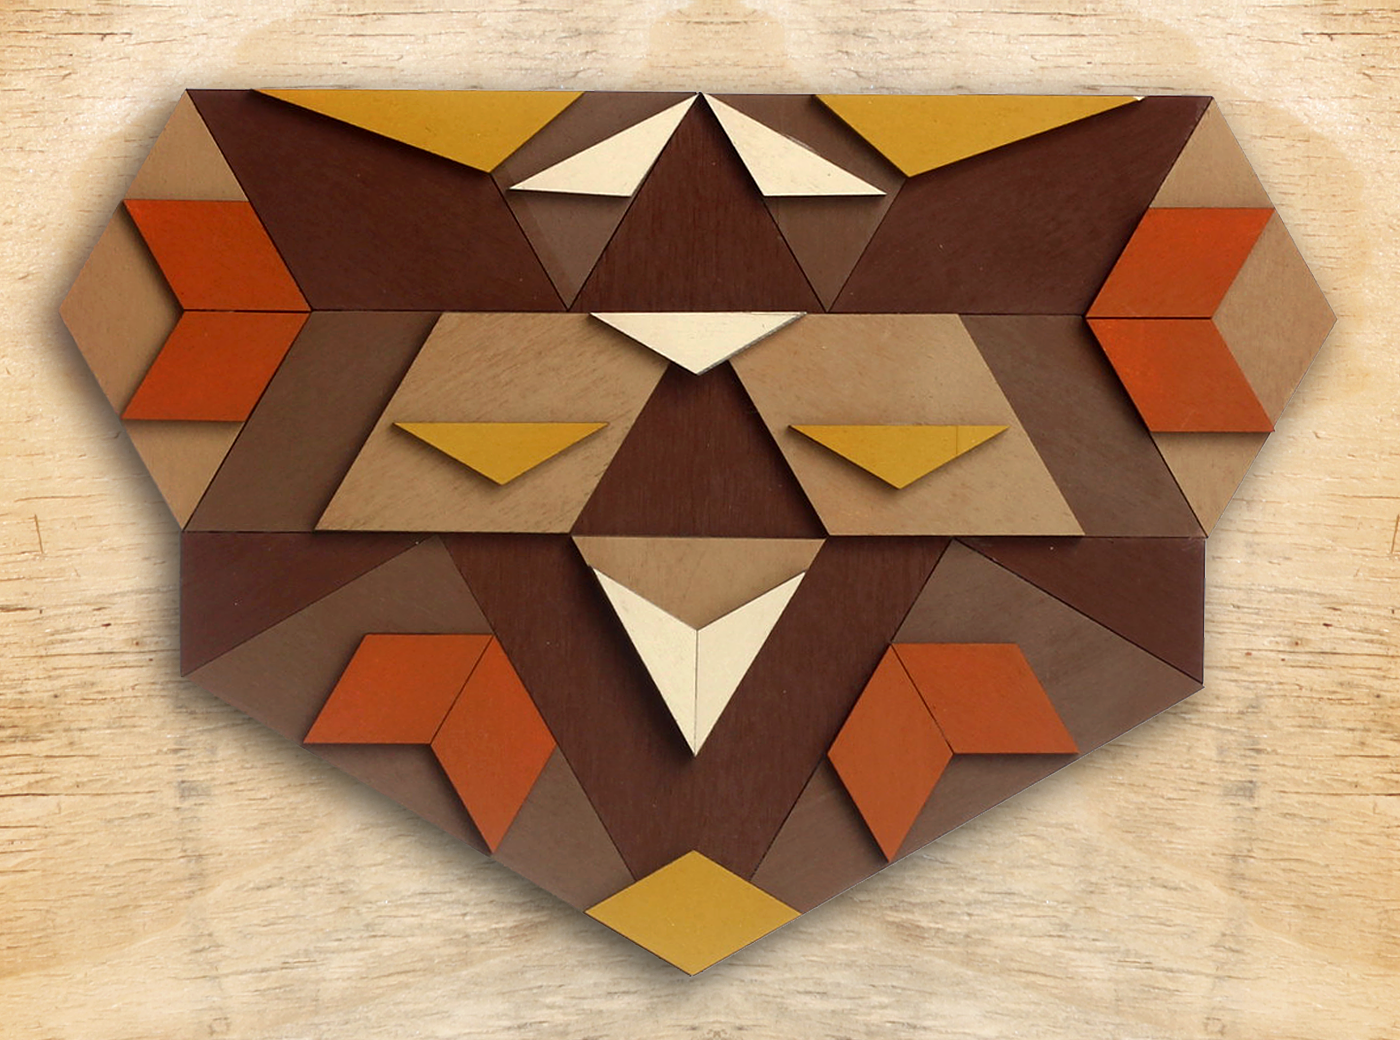 Pierre Ow Wood It Yourself bruxelles wood OW wood concept psychedelic geometric